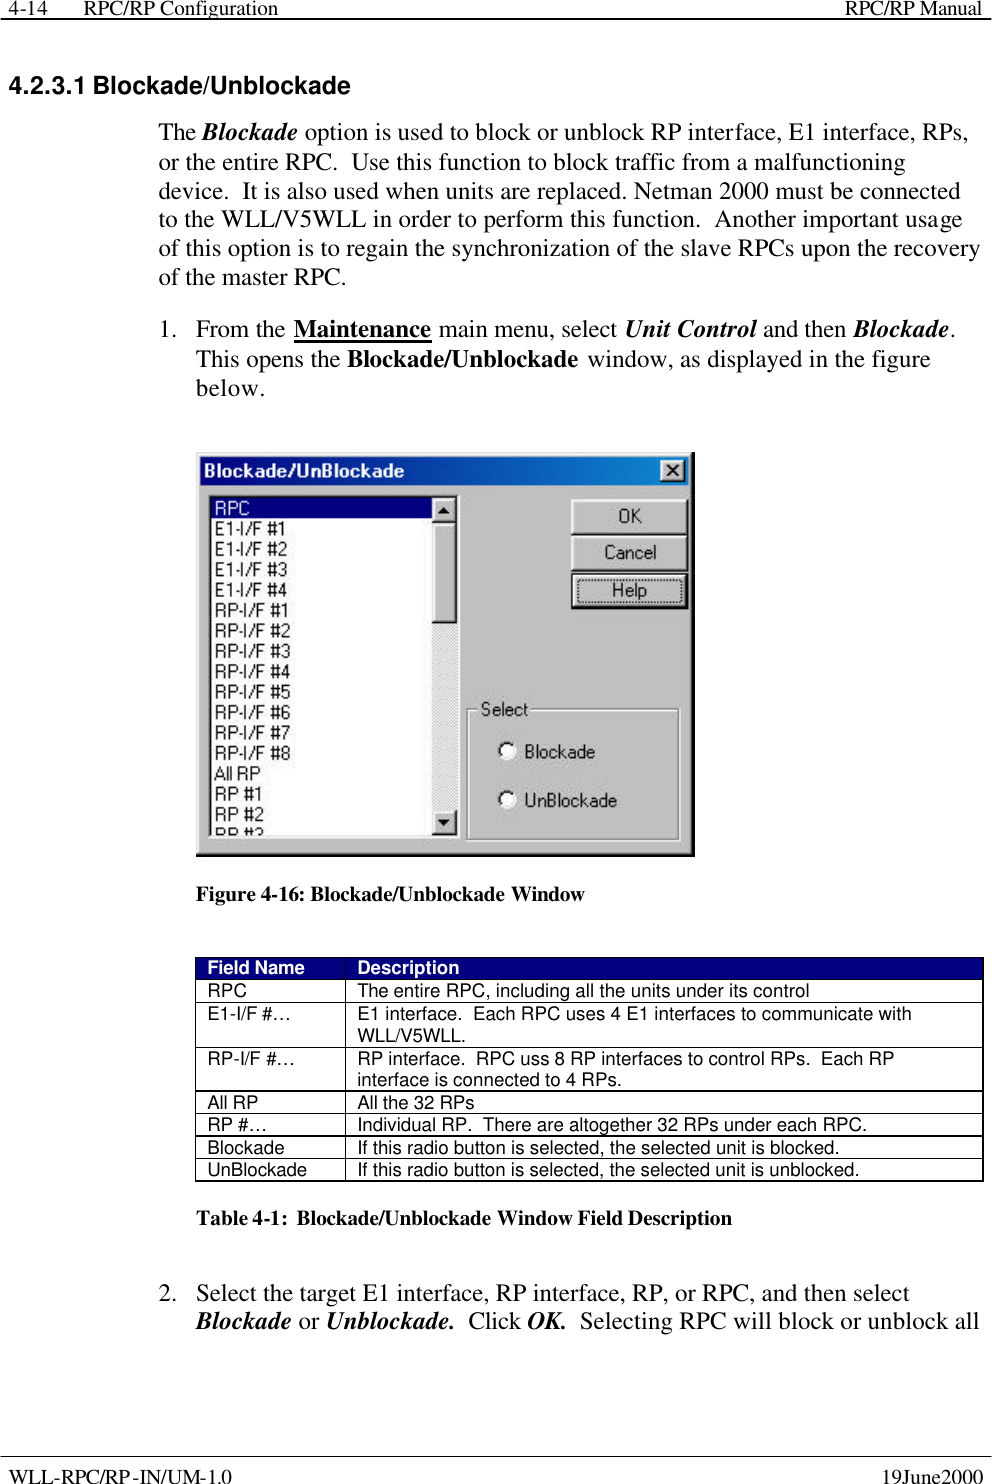  RPC/RP Configuration    RPC/RP Manual   WLL-RPC/RP-IN/UM-1.0    19June2000 4-144.2.3.1 Blockade/Unblockade The Blockade option is used to block or unblock RP interface, E1 interface, RPs, or the entire RPC.  Use this function to block traffic from a malfunctioning device.  It is also used when units are replaced. Netman 2000 must be connected to the WLL/V5WLL in order to perform this function.  Another important usage of this option is to regain the synchronization of the slave RPCs upon the recovery of the master RPC.   1.  From the Maintenance main menu, select Unit Control and then Blockade.  This opens the Blockade/Unblockade window, as displayed in the figure below.  Figure 4-16: Blockade/Unblockade Window Field Name Description RPC The entire RPC, including all the units under its control E1-I/F #… E1 interface.  Each RPC uses 4 E1 interfaces to communicate with WLL/V5WLL. RP-I/F #… RP interface.  RPC uss 8 RP interfaces to control RPs.  Each RP interface is connected to 4 RPs. All RP All the 32 RPs RP #… Individual RP.  There are altogether 32 RPs under each RPC. Blockade If this radio button is selected, the selected unit is blocked. UnBlockade If this radio button is selected, the selected unit is unblocked. Table 4-1:  Blockade/Unblockade Window Field Description 2.  Select the target E1 interface, RP interface, RP, or RPC, and then select Blockade or Unblockade.  Click OK.  Selecting RPC will block or unblock all 